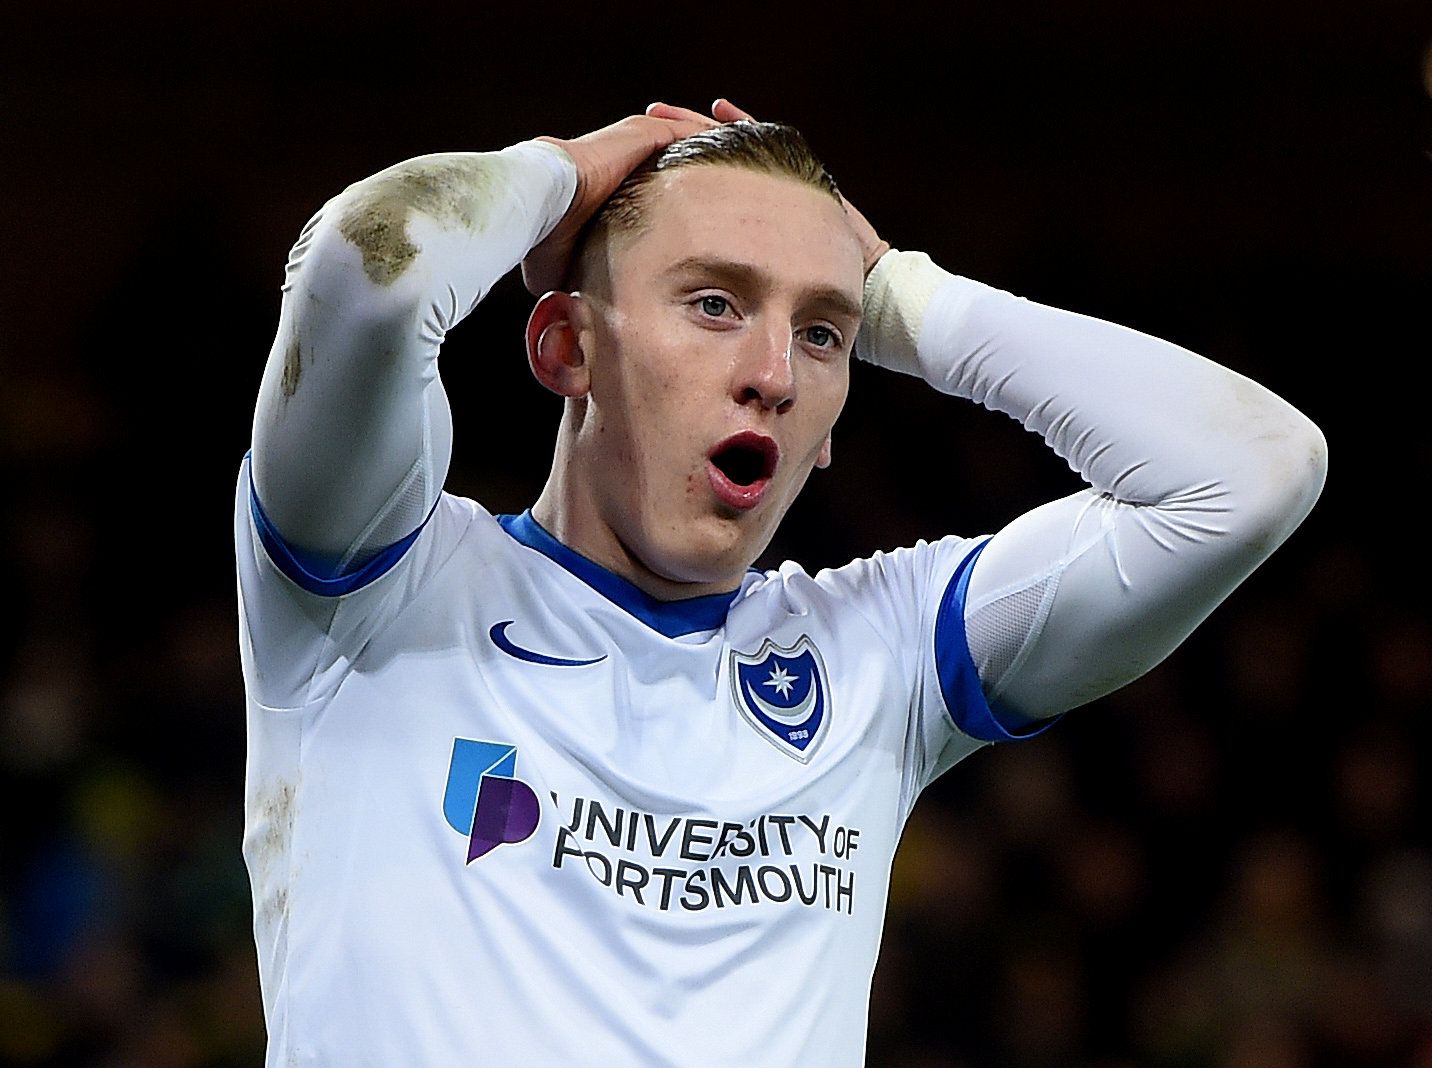 Soccer Football - FA Cup Third Round - Norwich City v Portsmouth - Carrow Road, Norwich, Britain - January 5, 2019   Portsmouth's Ronan Curtis reacts after missing a chance to score   Action Images/Alan Walter